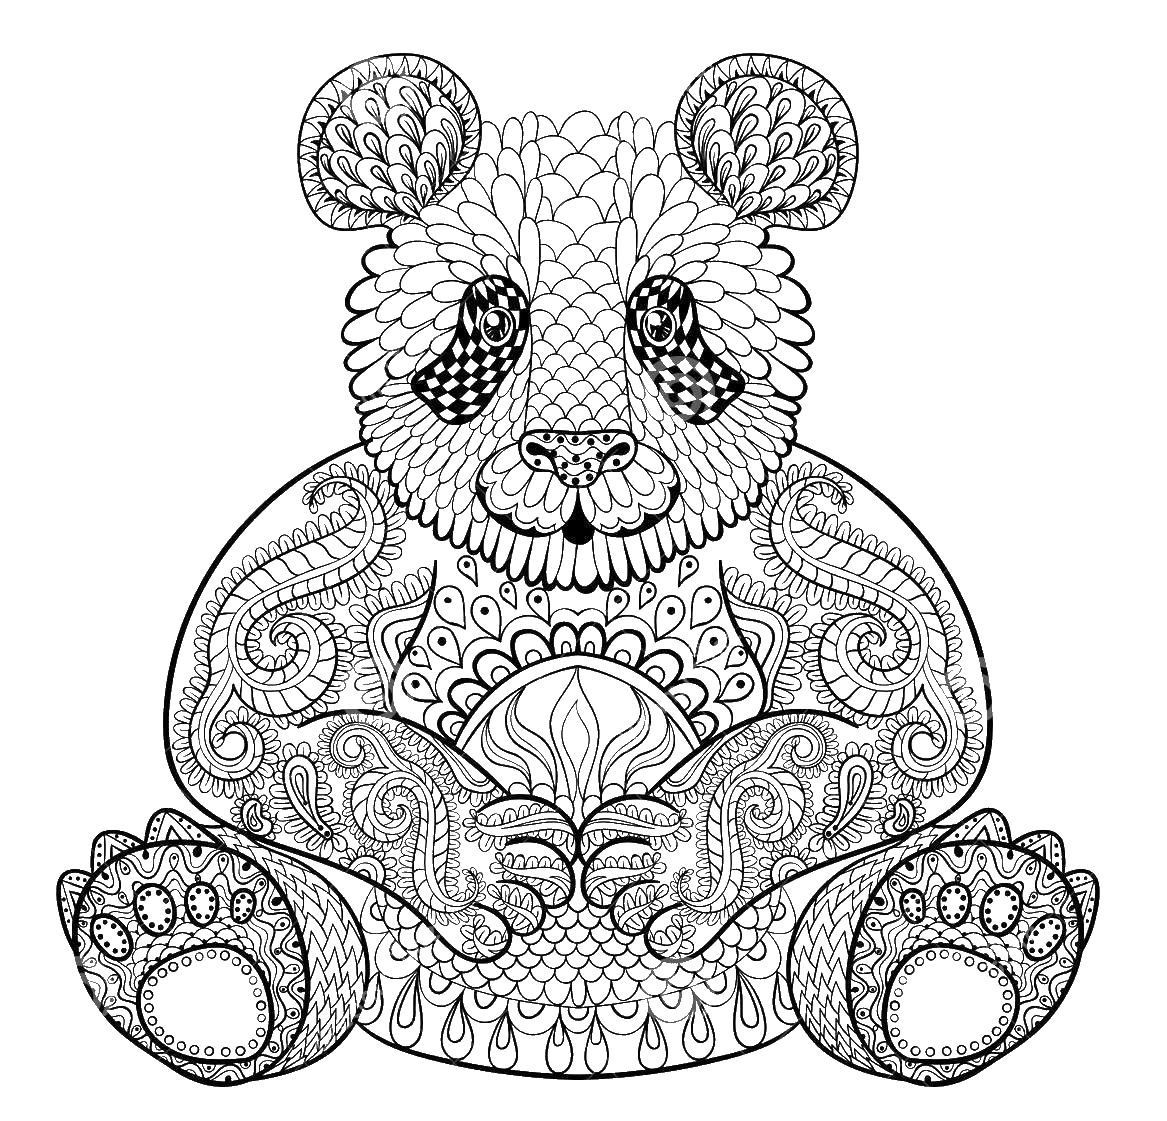 Panda Coloring Pages For Adults
 Adult Coloring Pages Panda